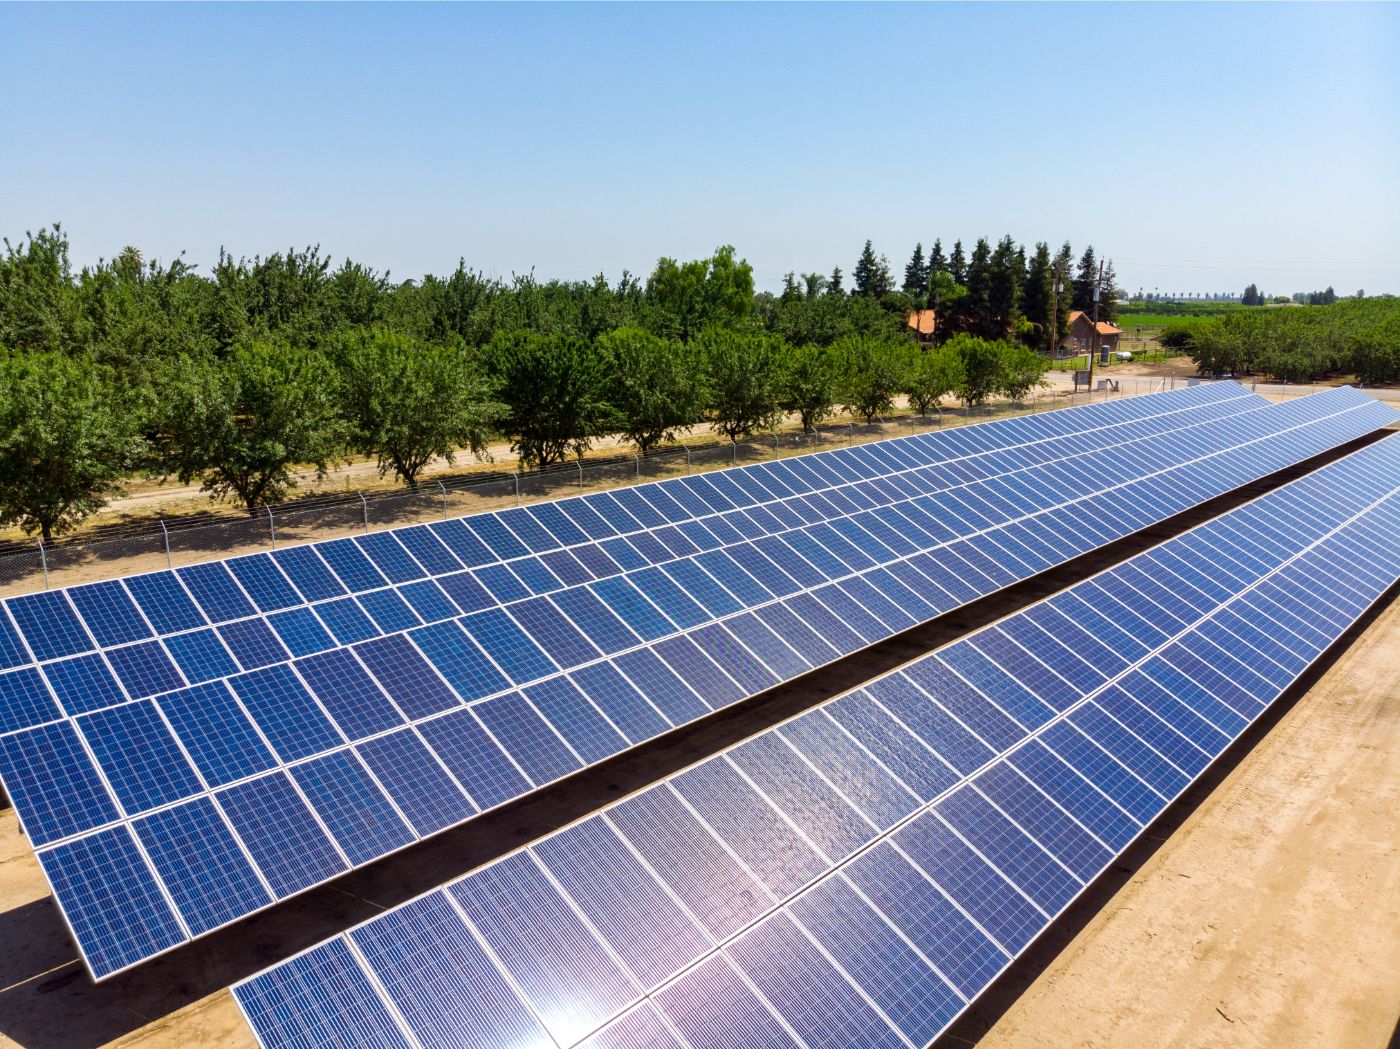 Closeup view of three rows of solar panels at Machado Farms in Fresno with crop trees in the background.